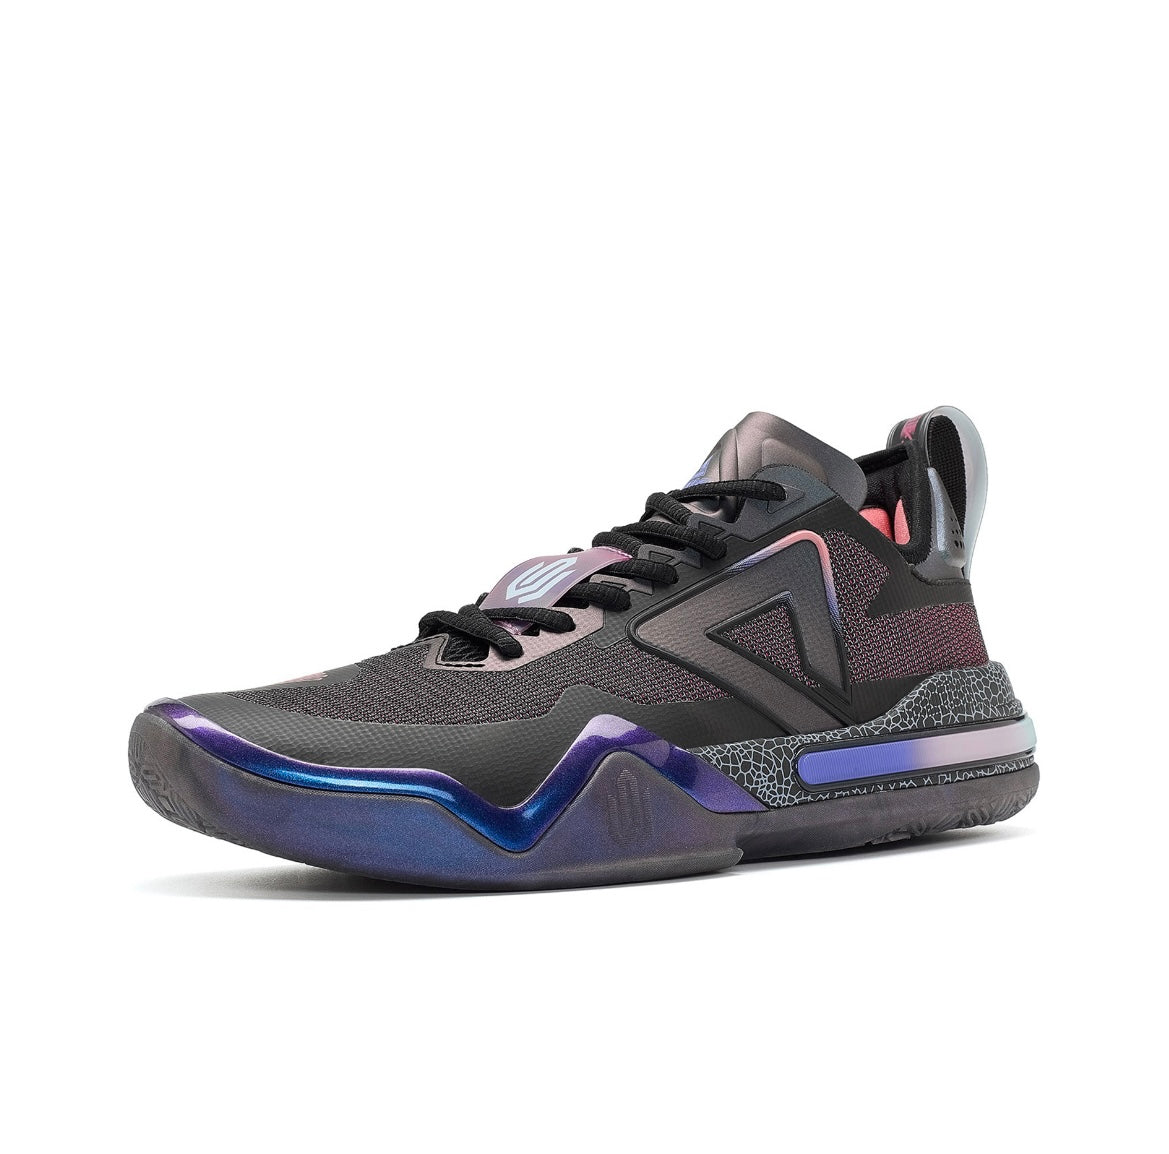 Peak Andrew Wiggins AW1-Switch Taichi Basketball Shoes - DNA